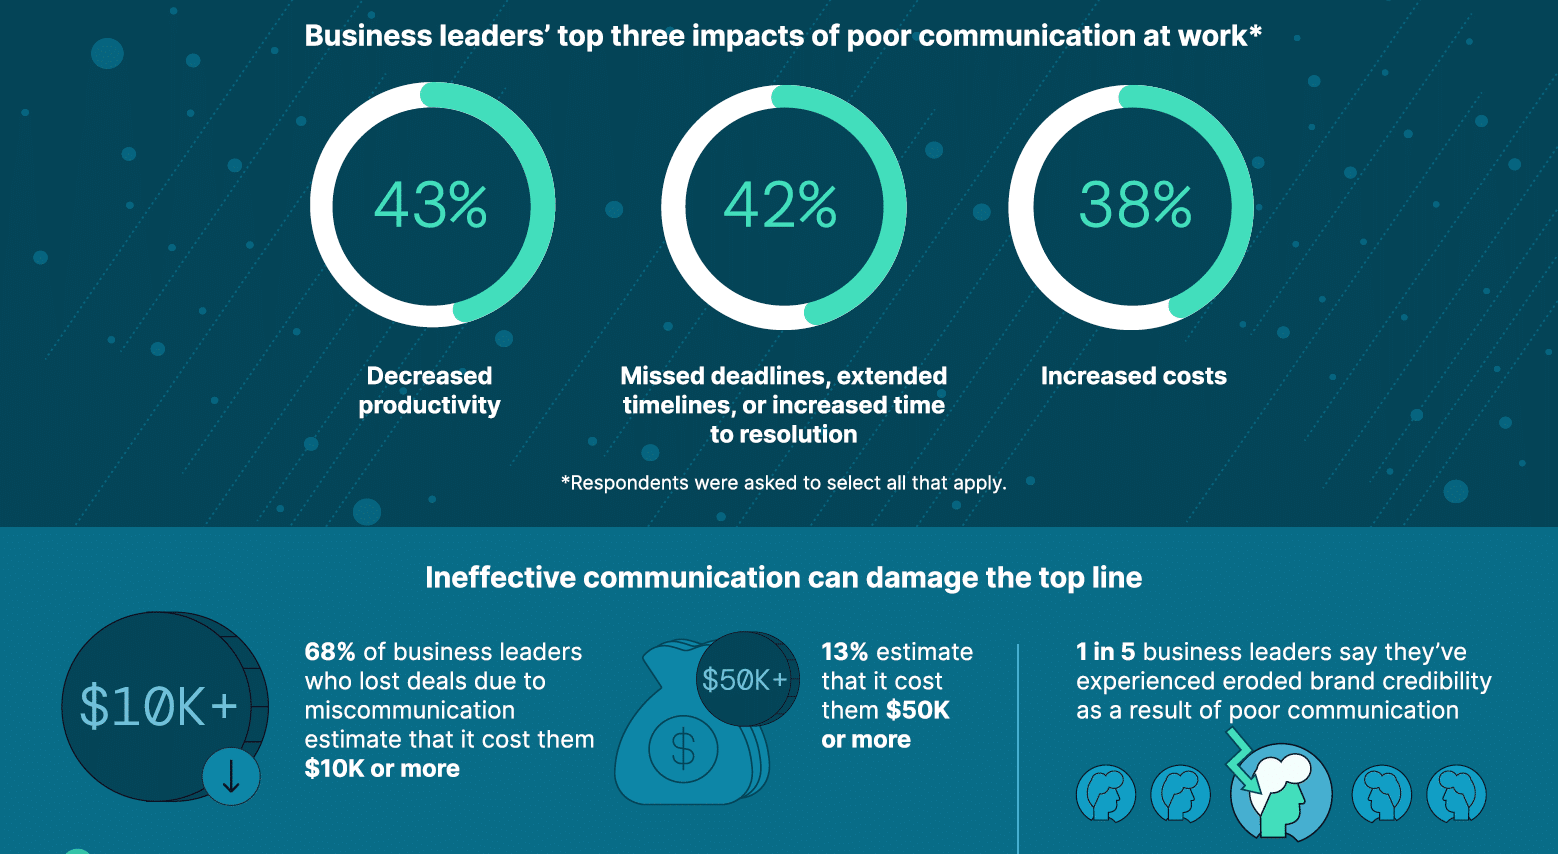 Business leaders' top three impacts of poor communication at work